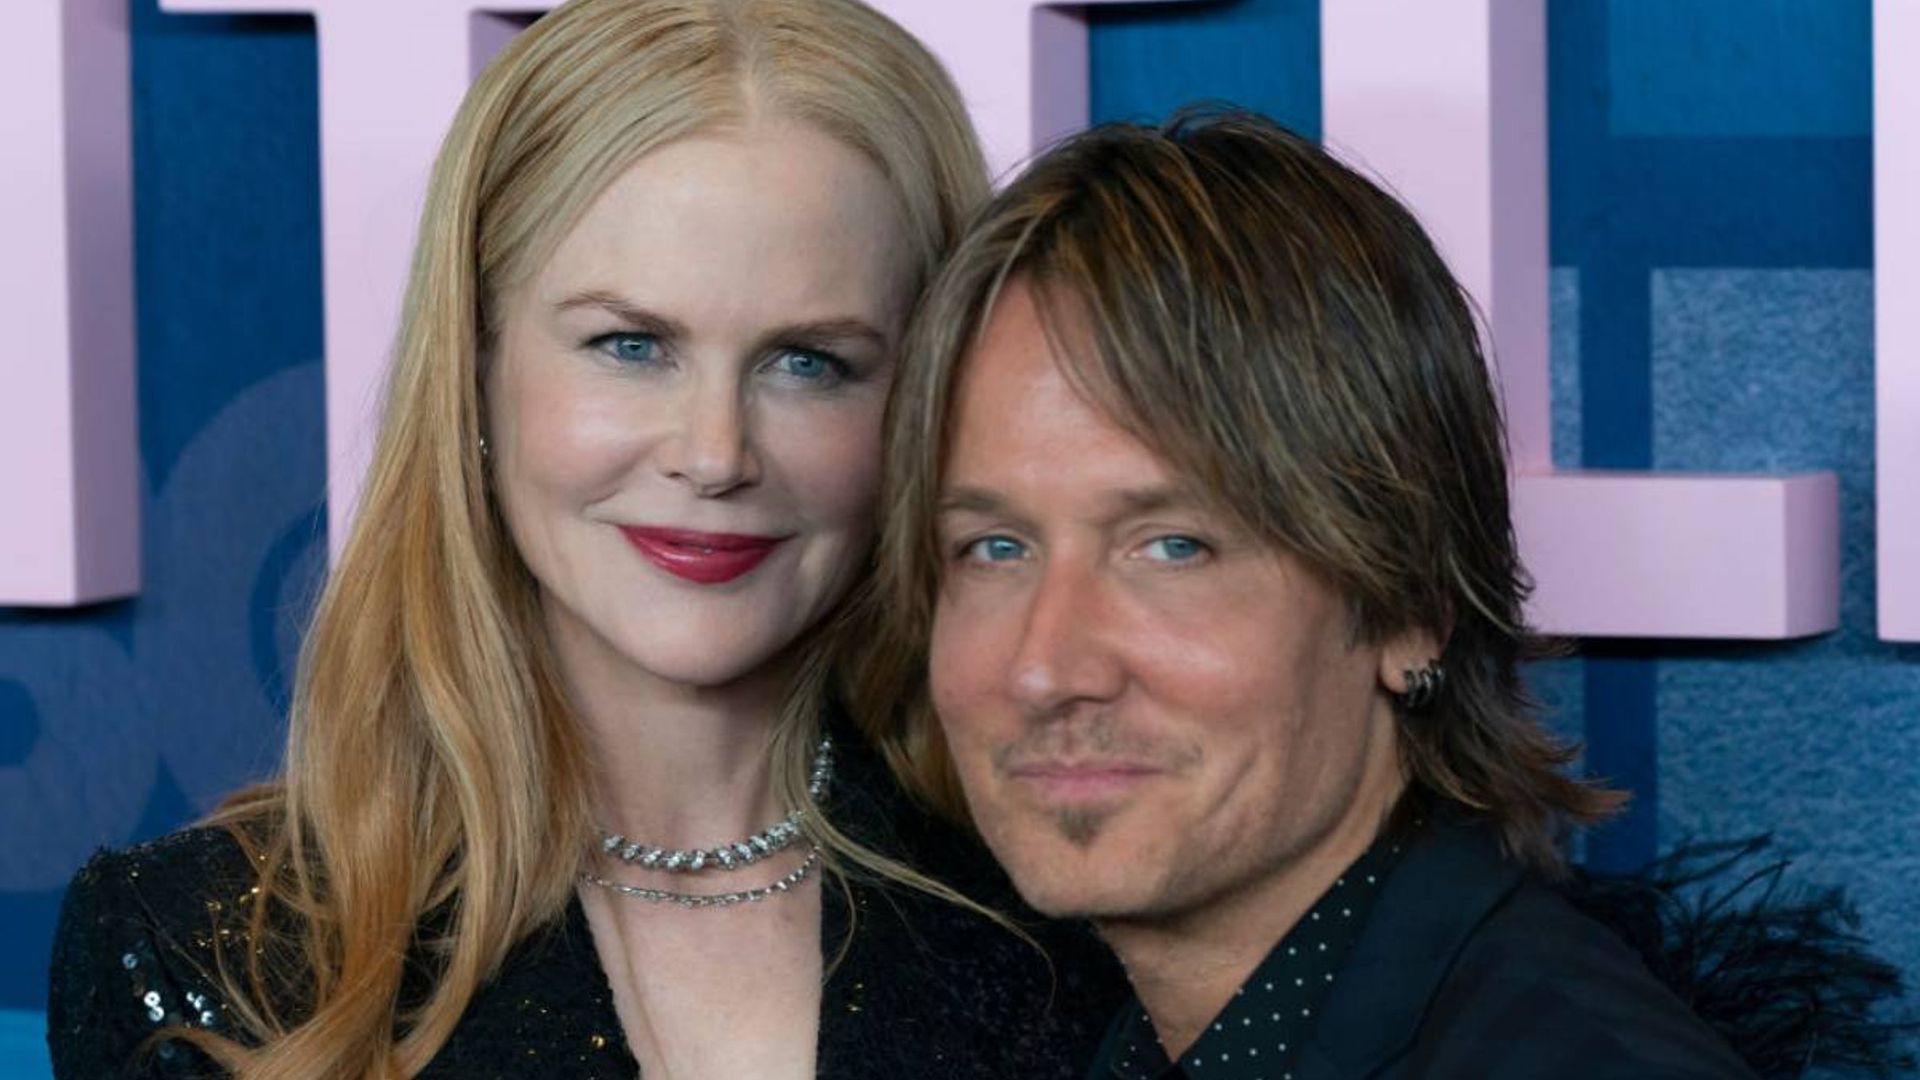 Nicole Kidman and Keith Urban are couple goals in adorable photo for heartfelt cause